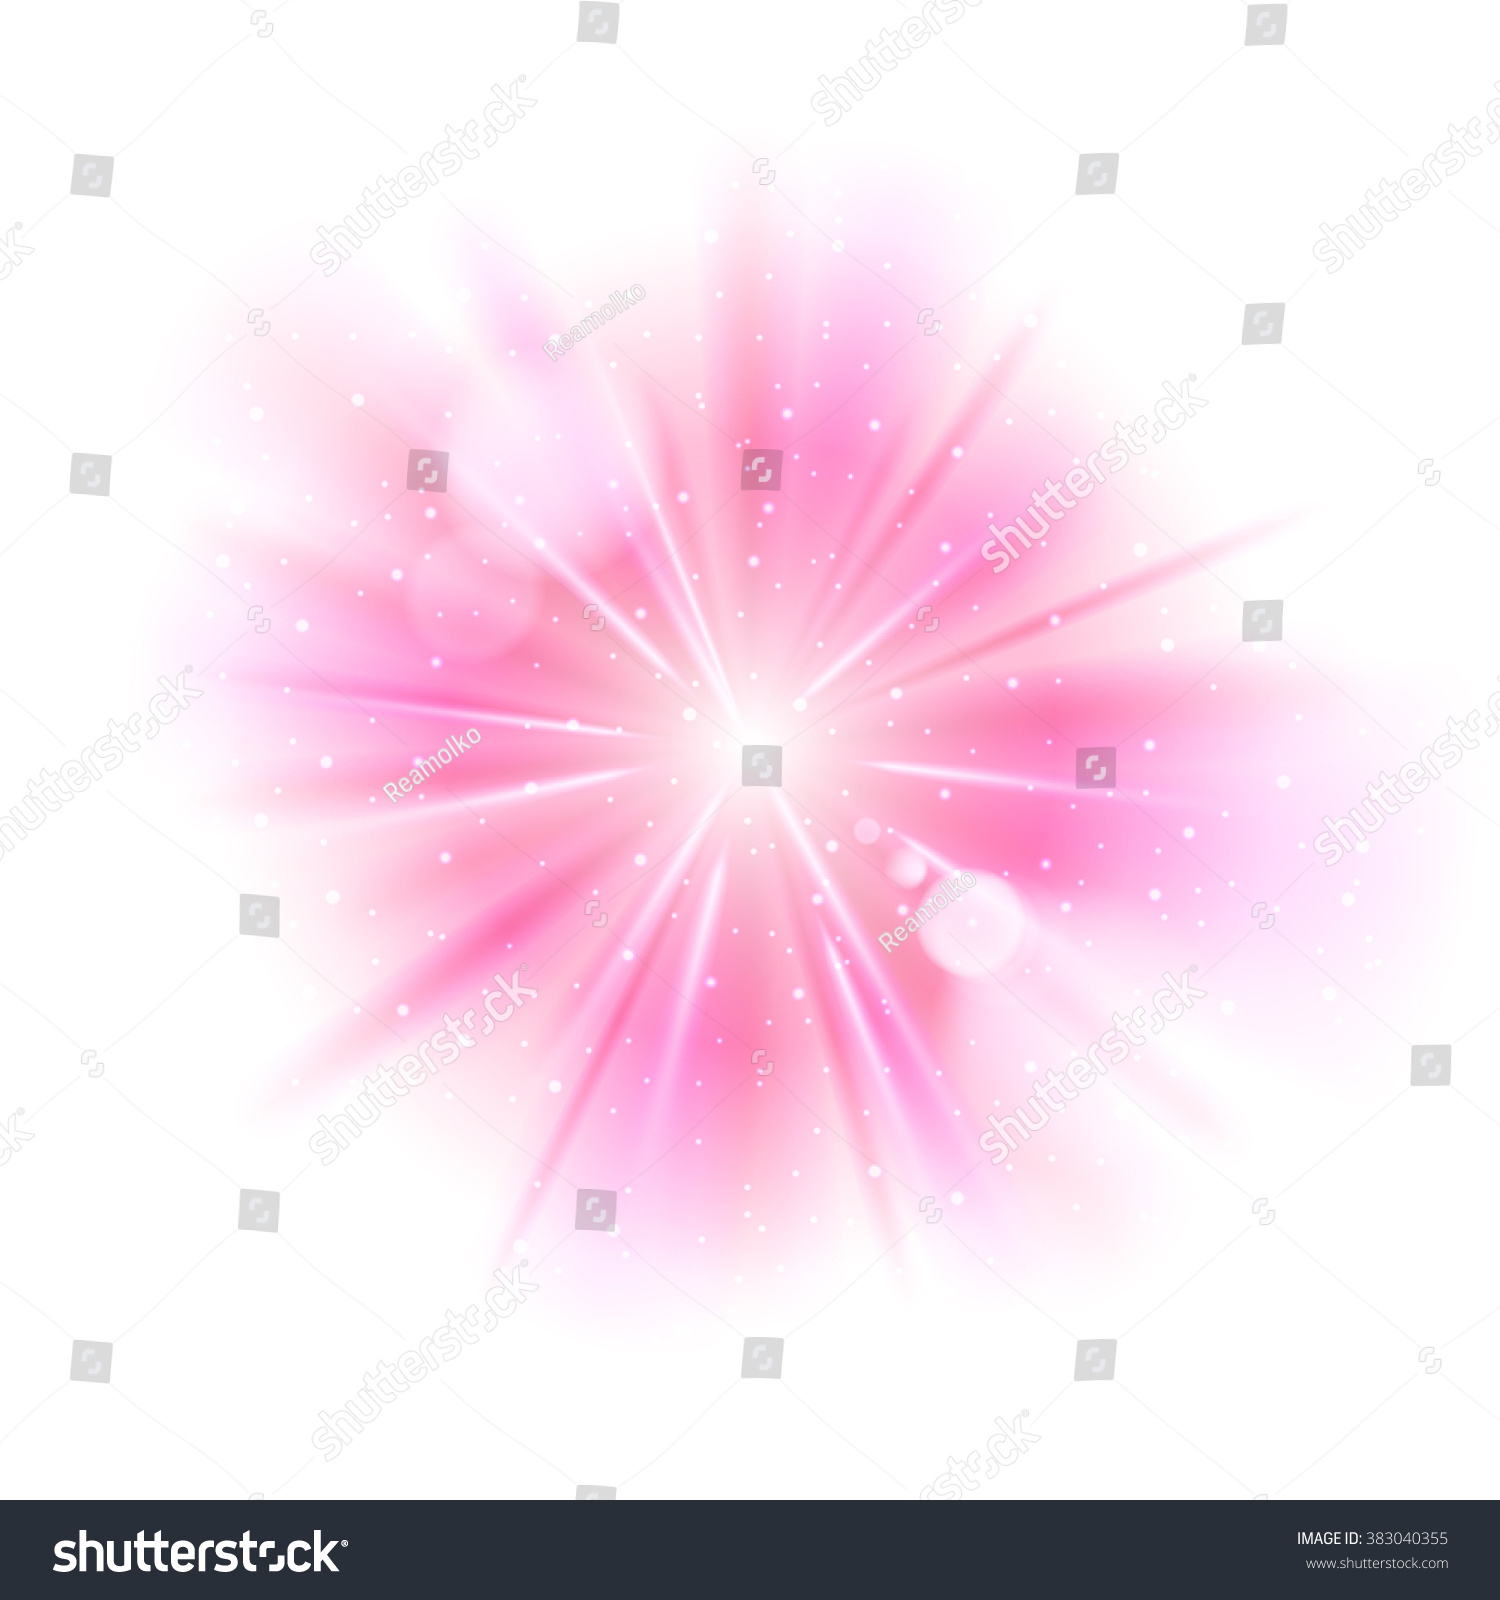 Pink Burst Images Stock Photos And Vectors Shutterstock